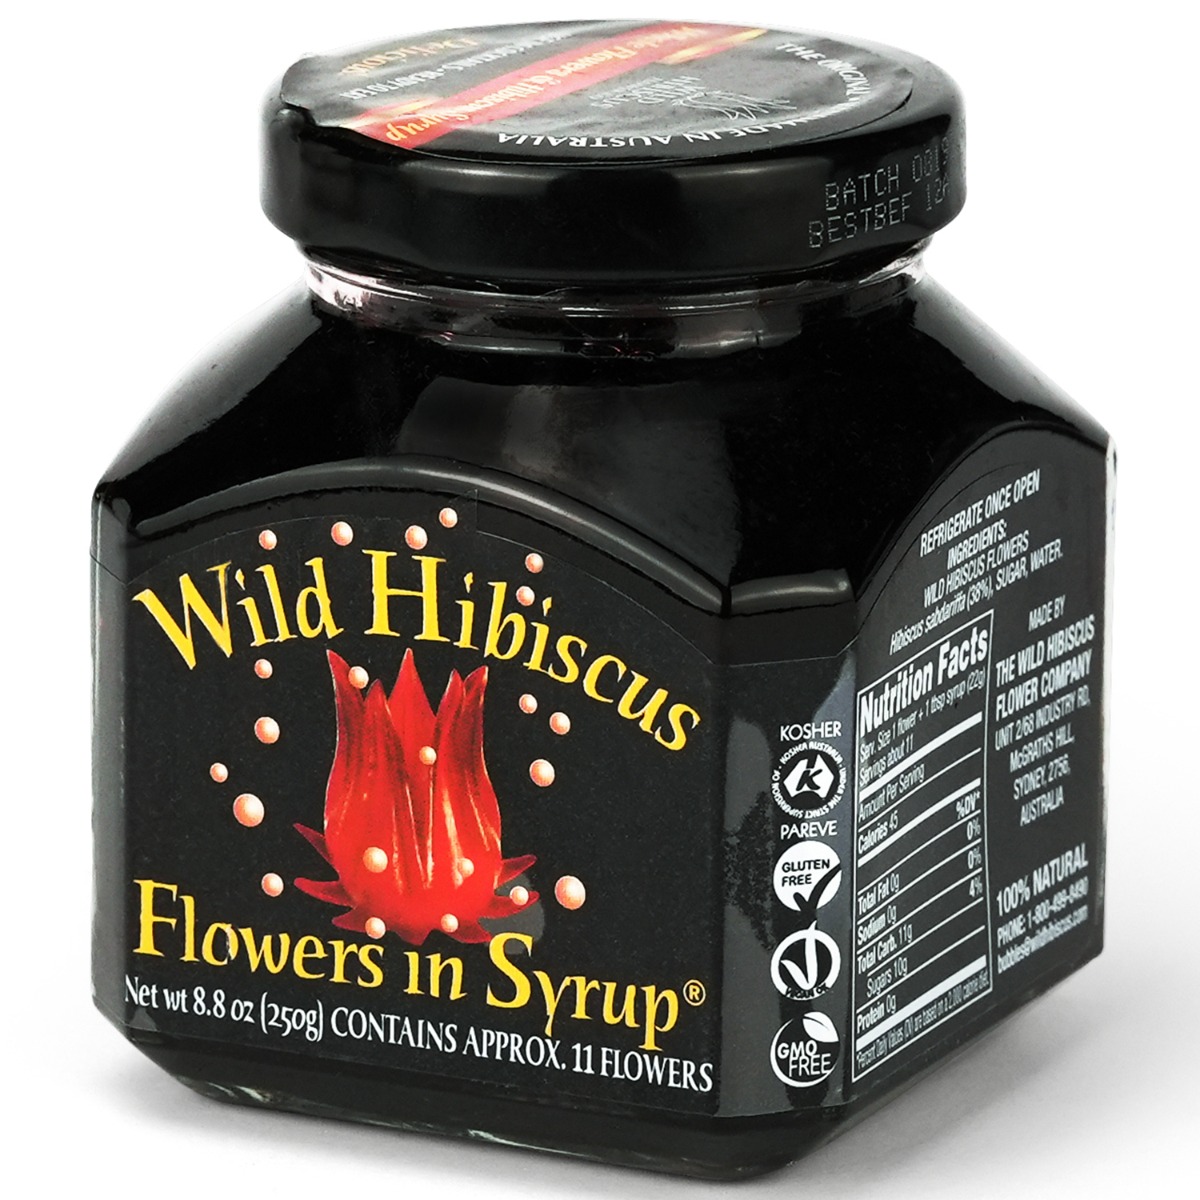  Dried Hibiscus Flowers 8.8 oz, Great For Hibiscus Tea